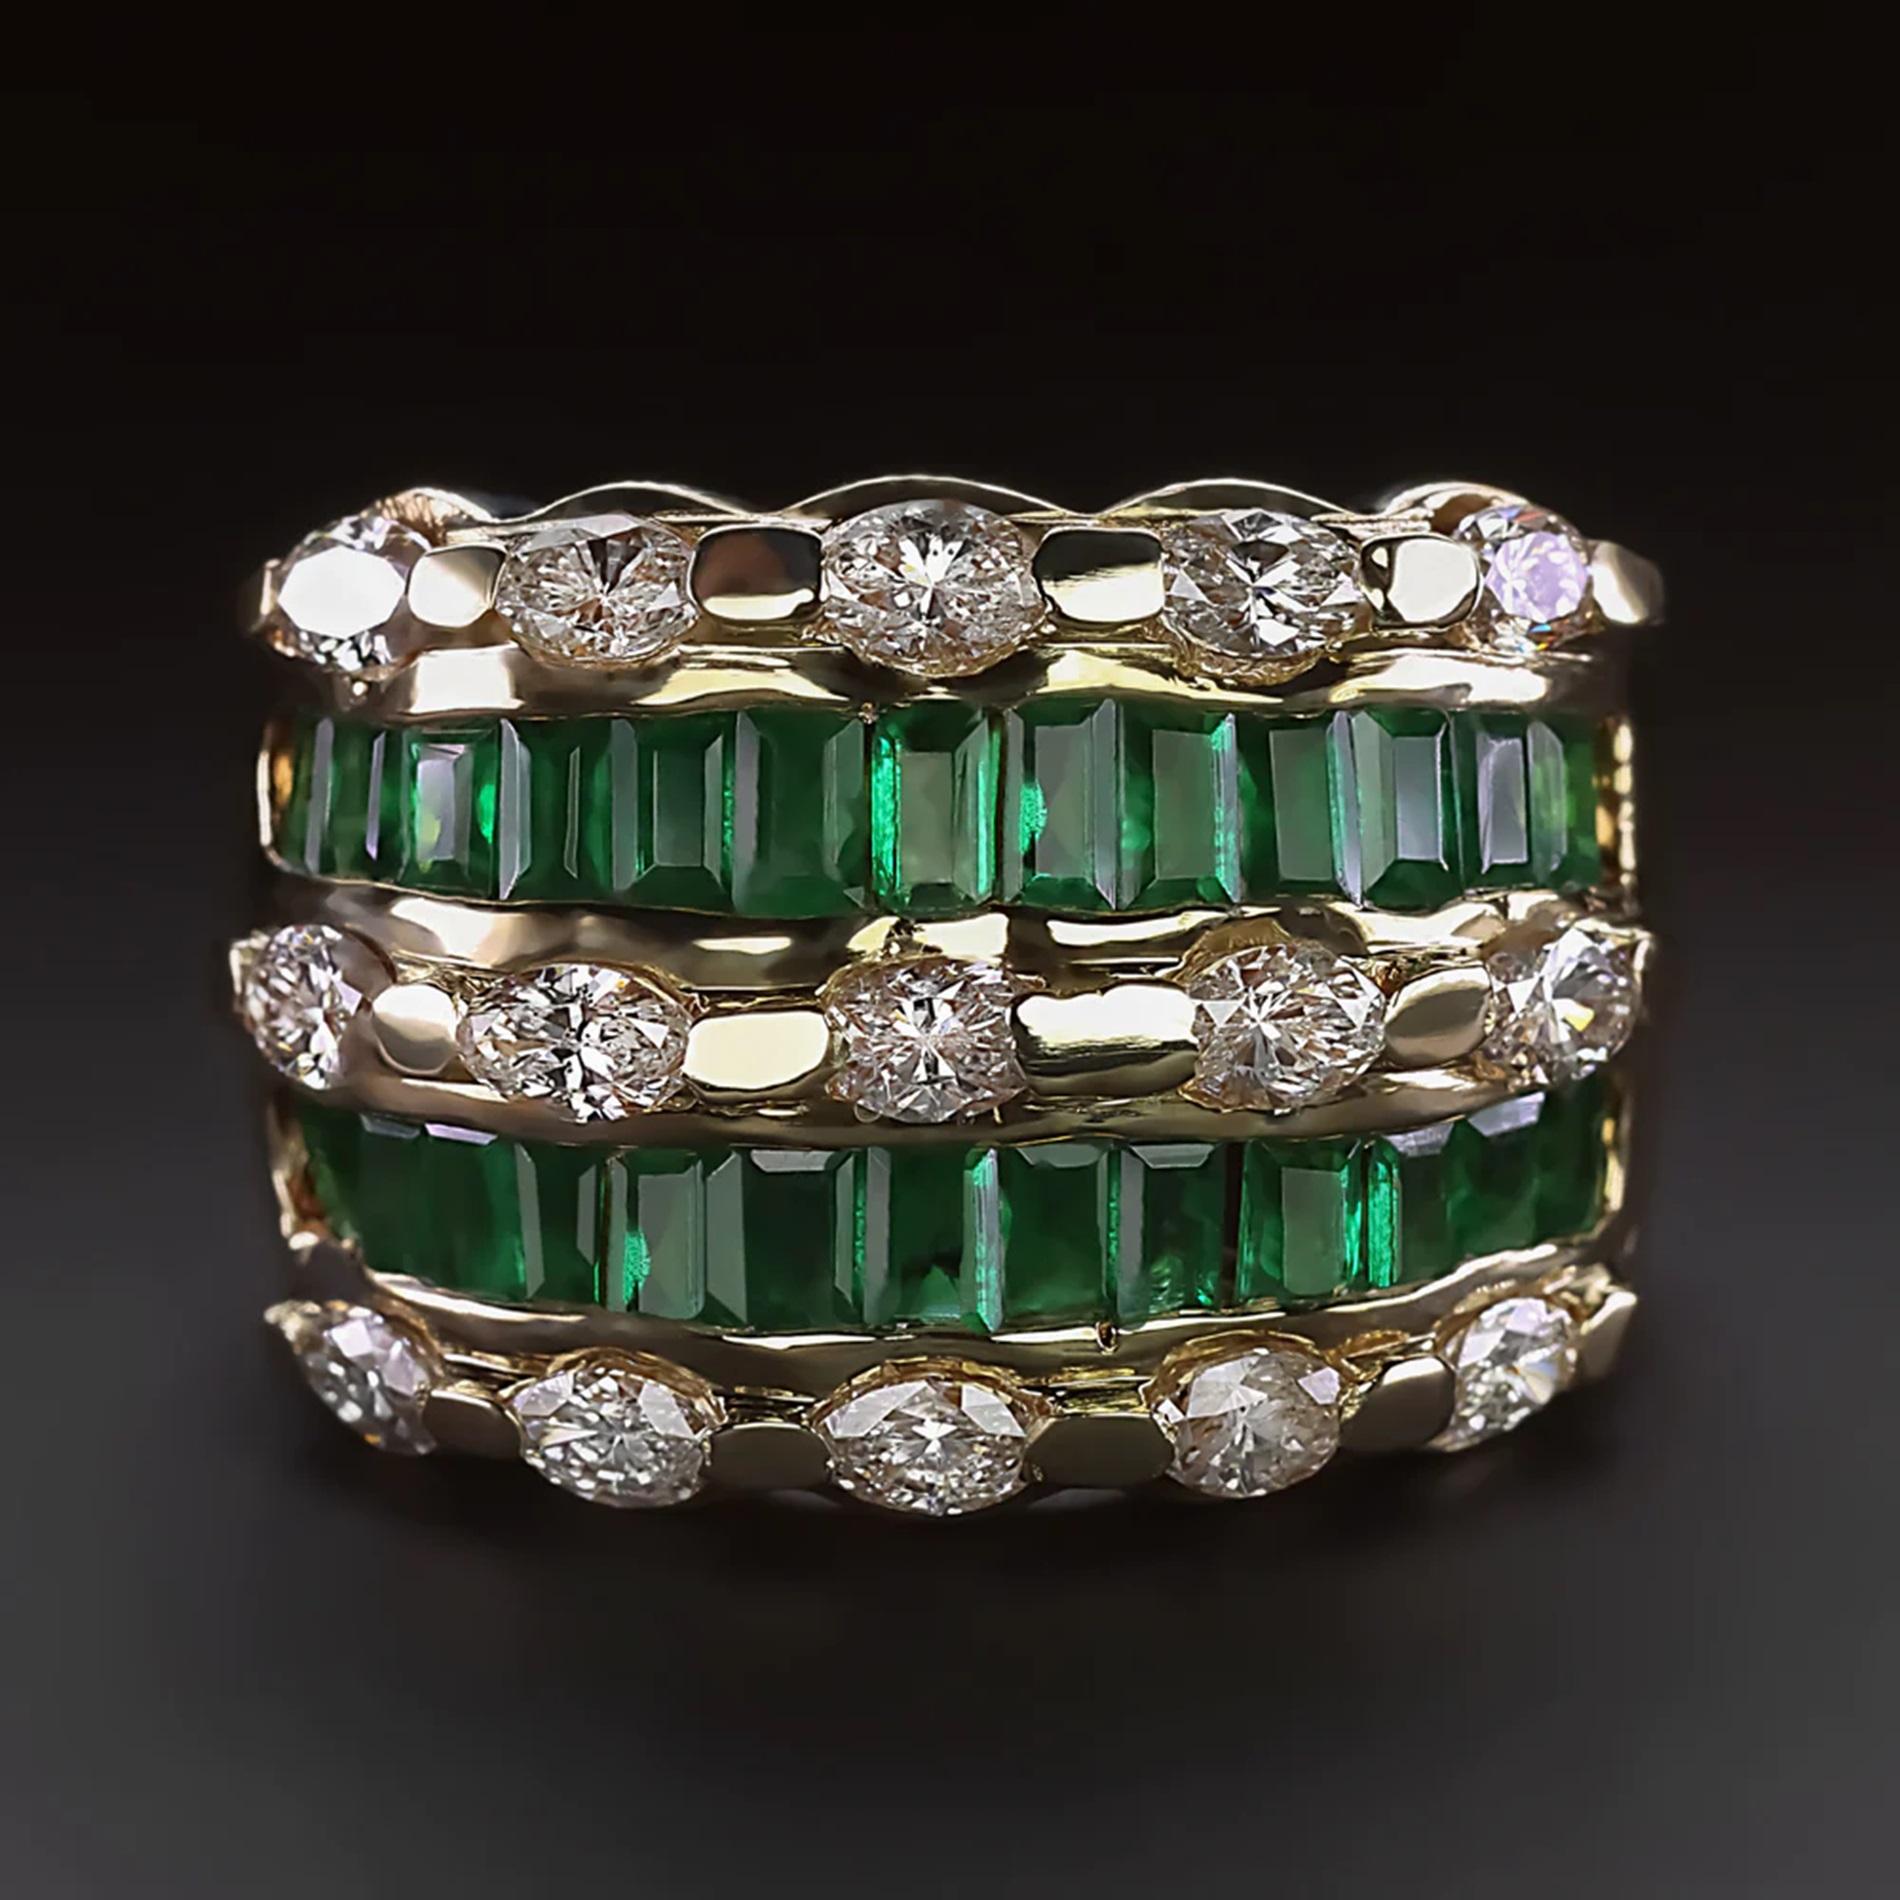 This wide diamond and emerald band offers a luxurious, eye catching look with rich color and bright sparkle!

Highlights:

- 1.50 carat of beautifully white and eye clean marquise cut diamonds

- 2.50 carats of natural, rich green emeralds

- Very